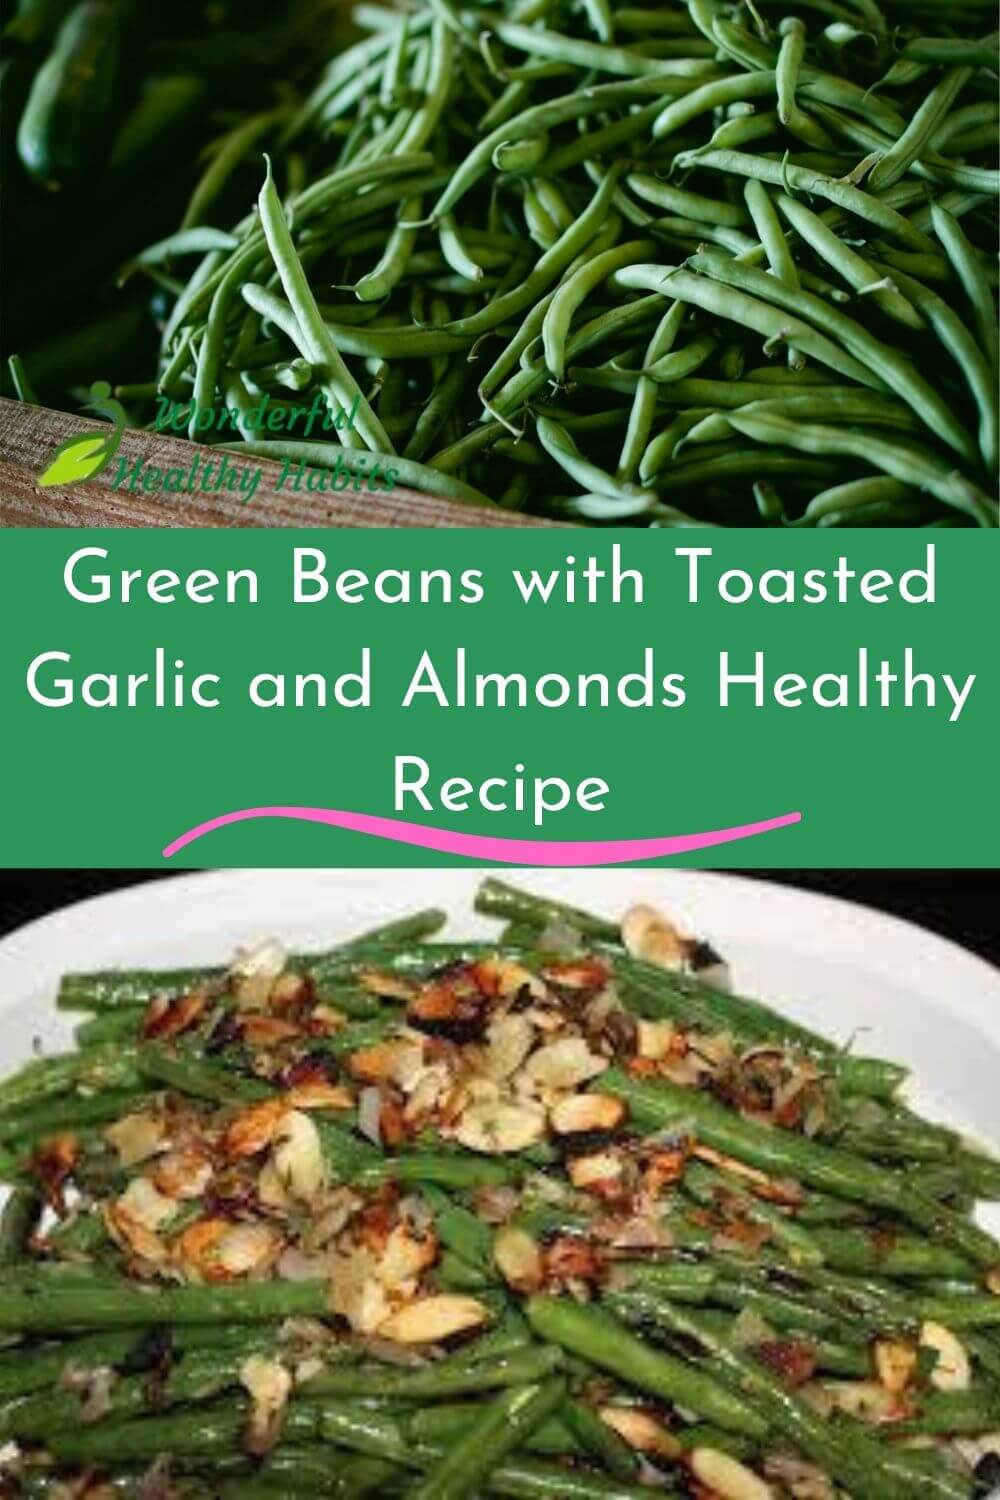 Green Beans with Toasted Garlic and Almonds (Crowd out the cream of mushroom soup) Healthy Recipe